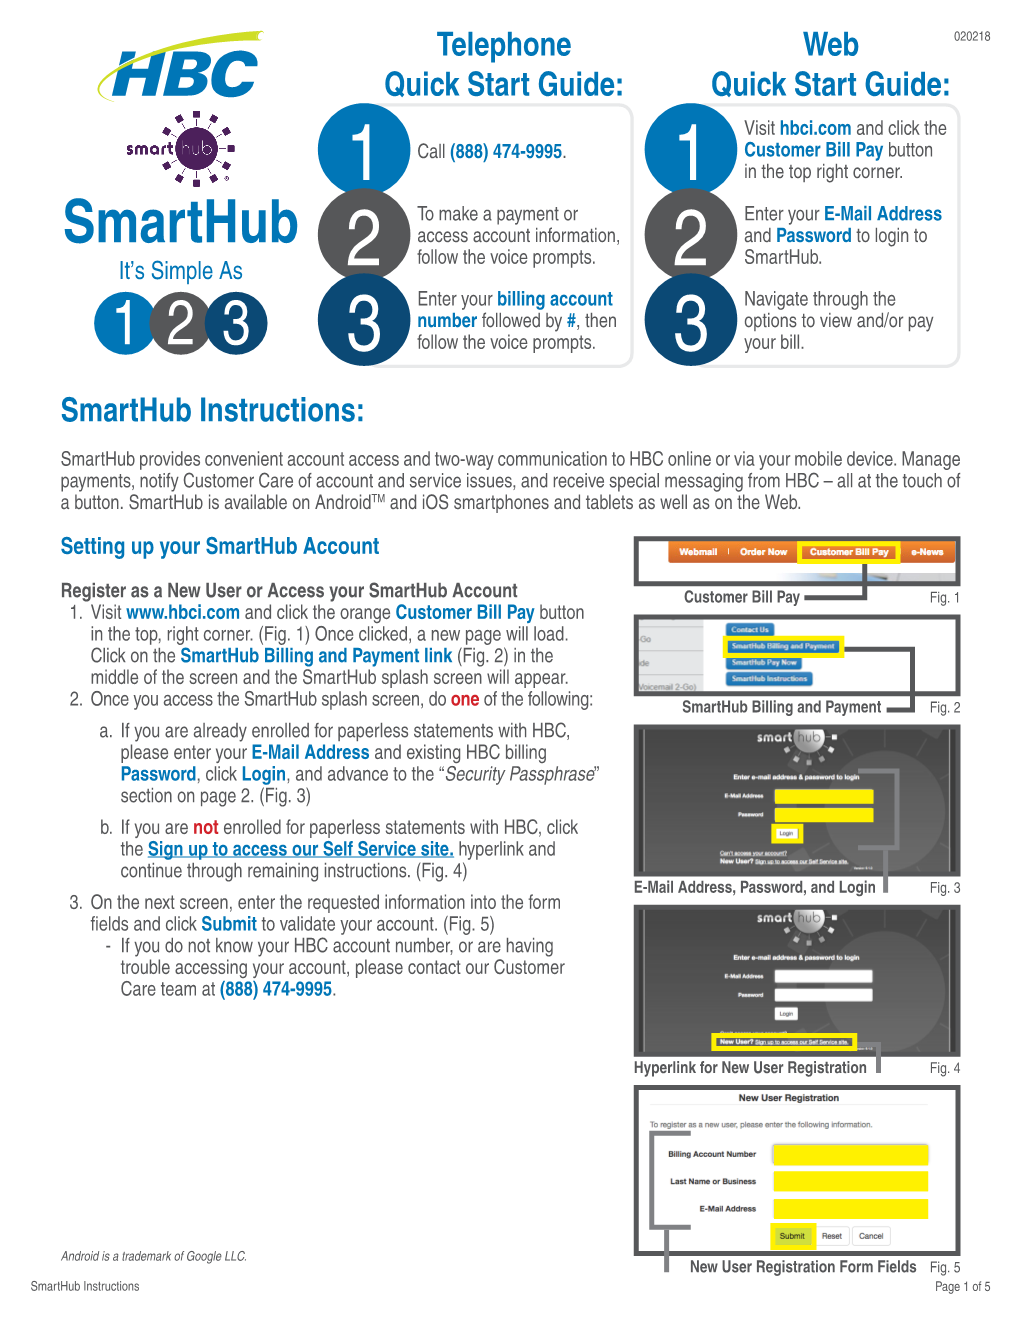 Smarthub Access Account Information, and Password to Login to Follow the Voice Prompts